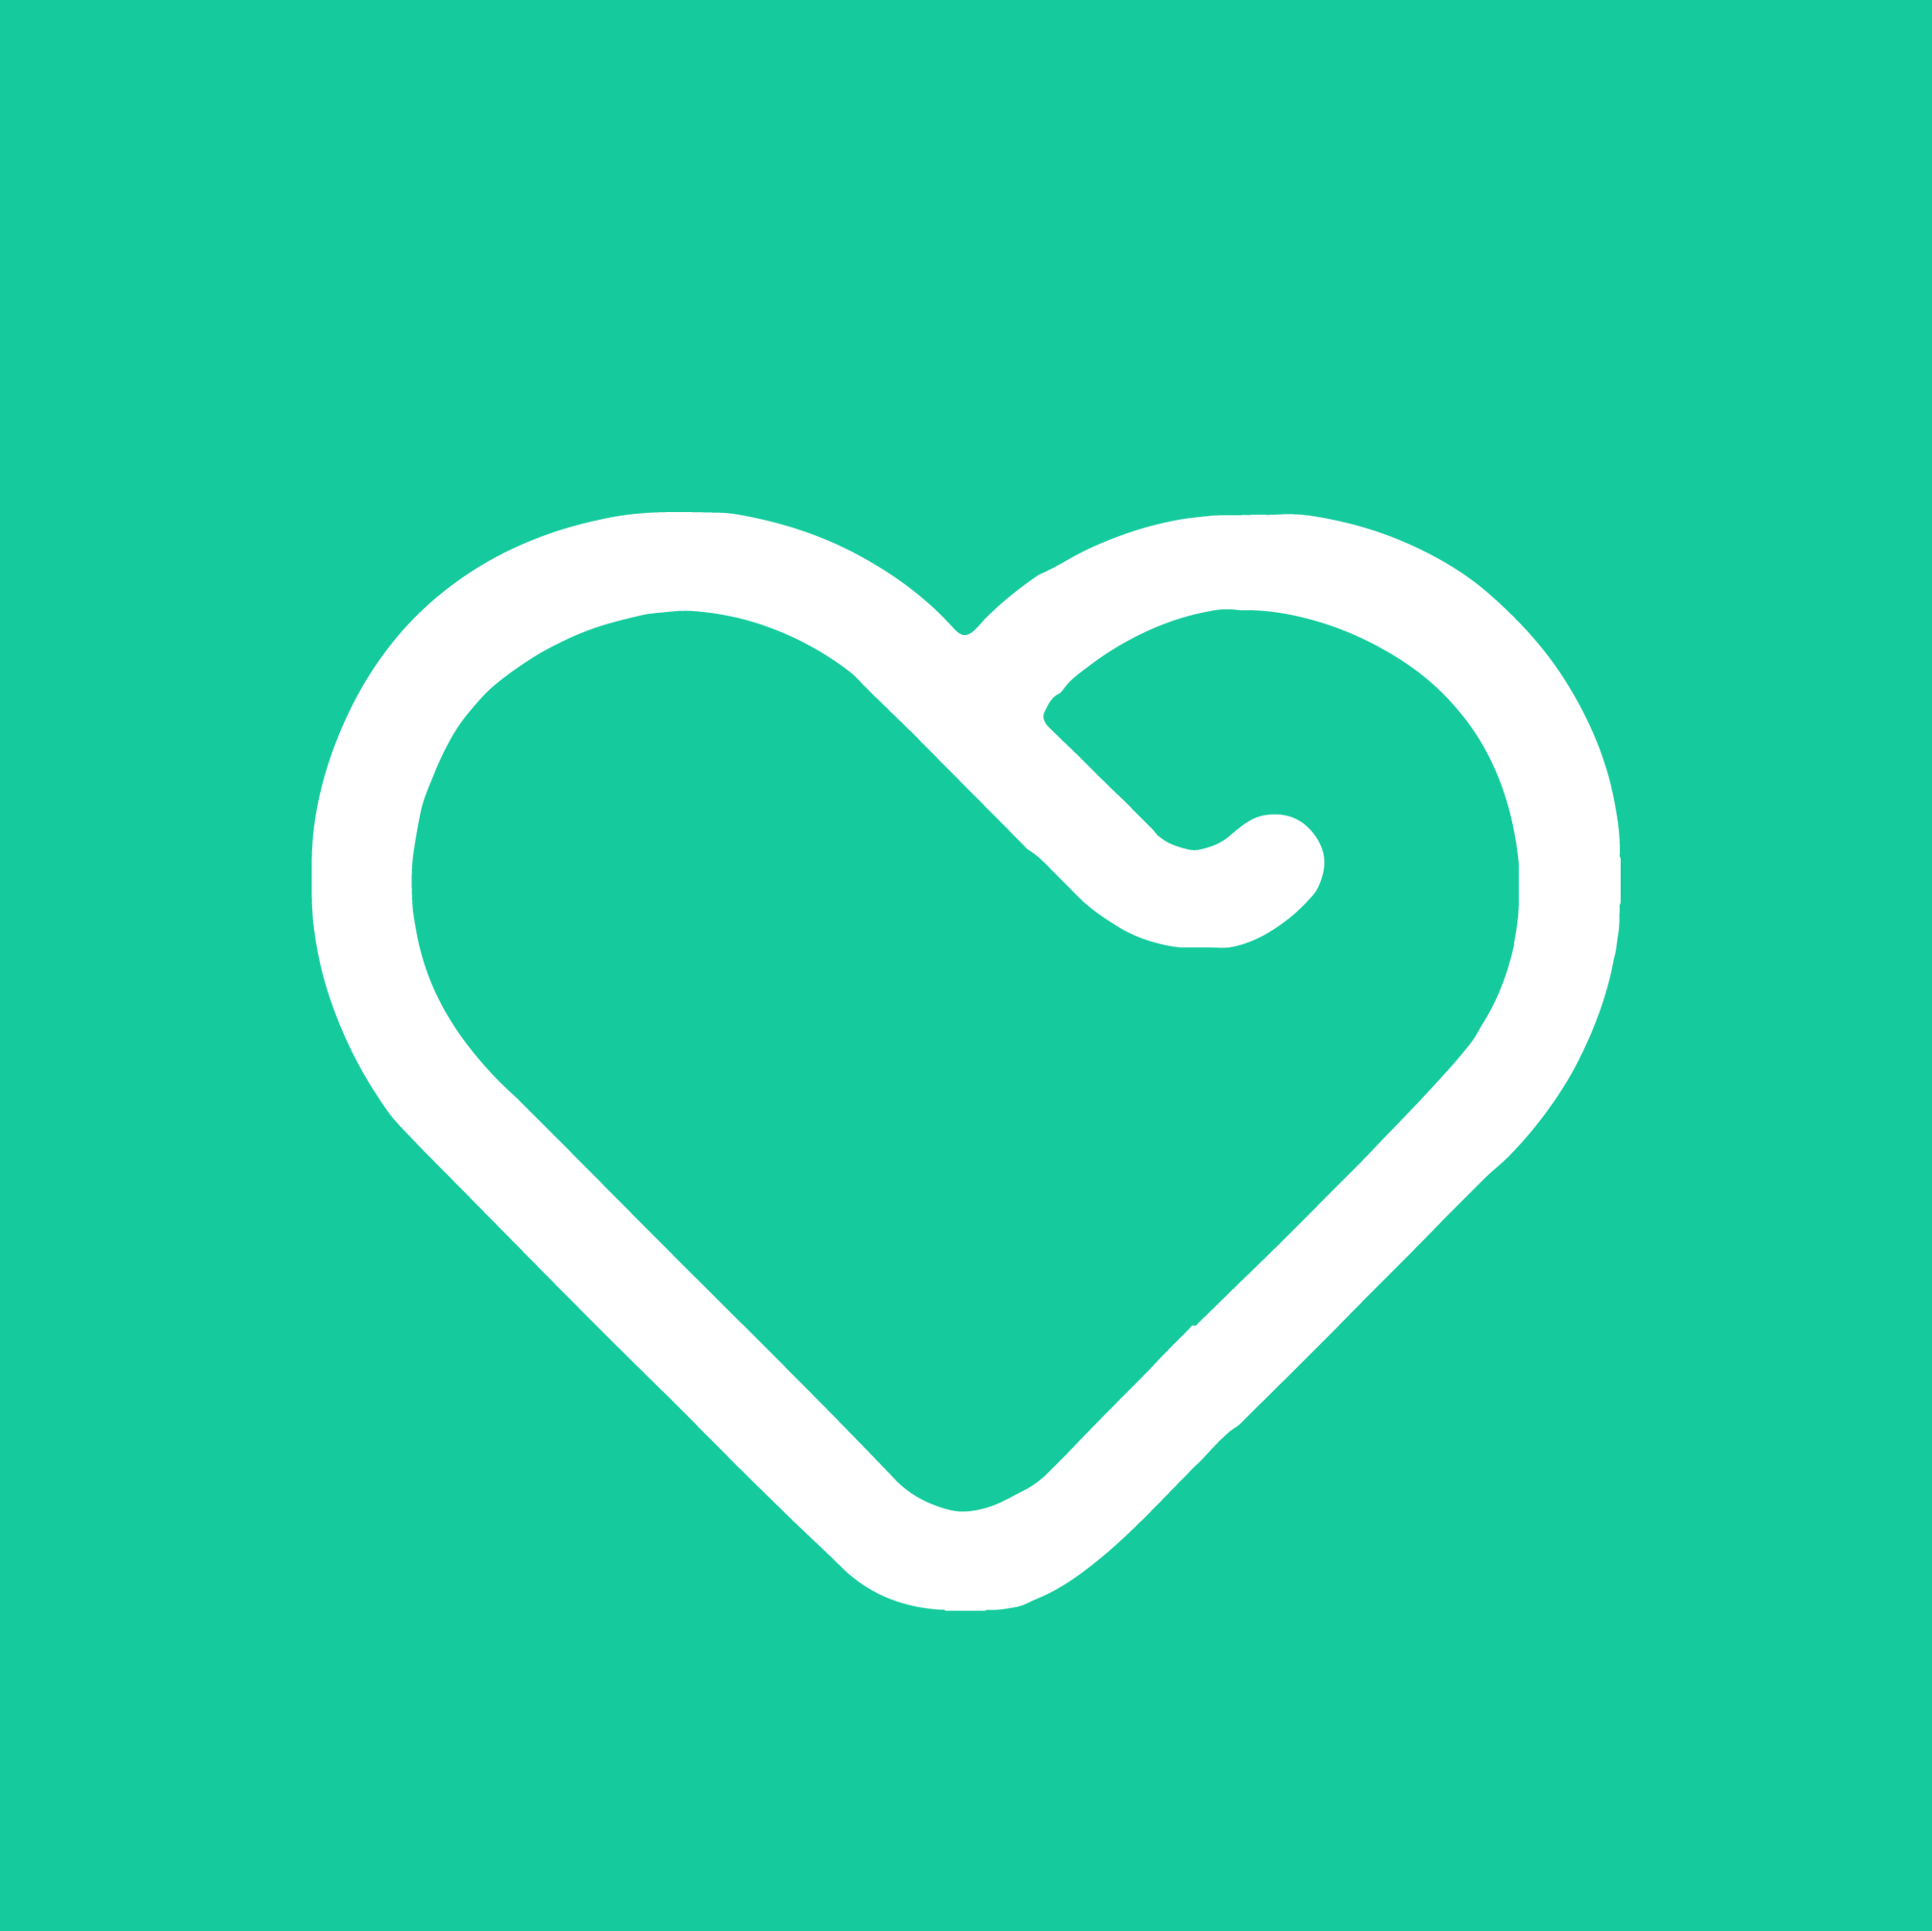 Yesil Health - An health assistance app for personalized health advice and recommendations